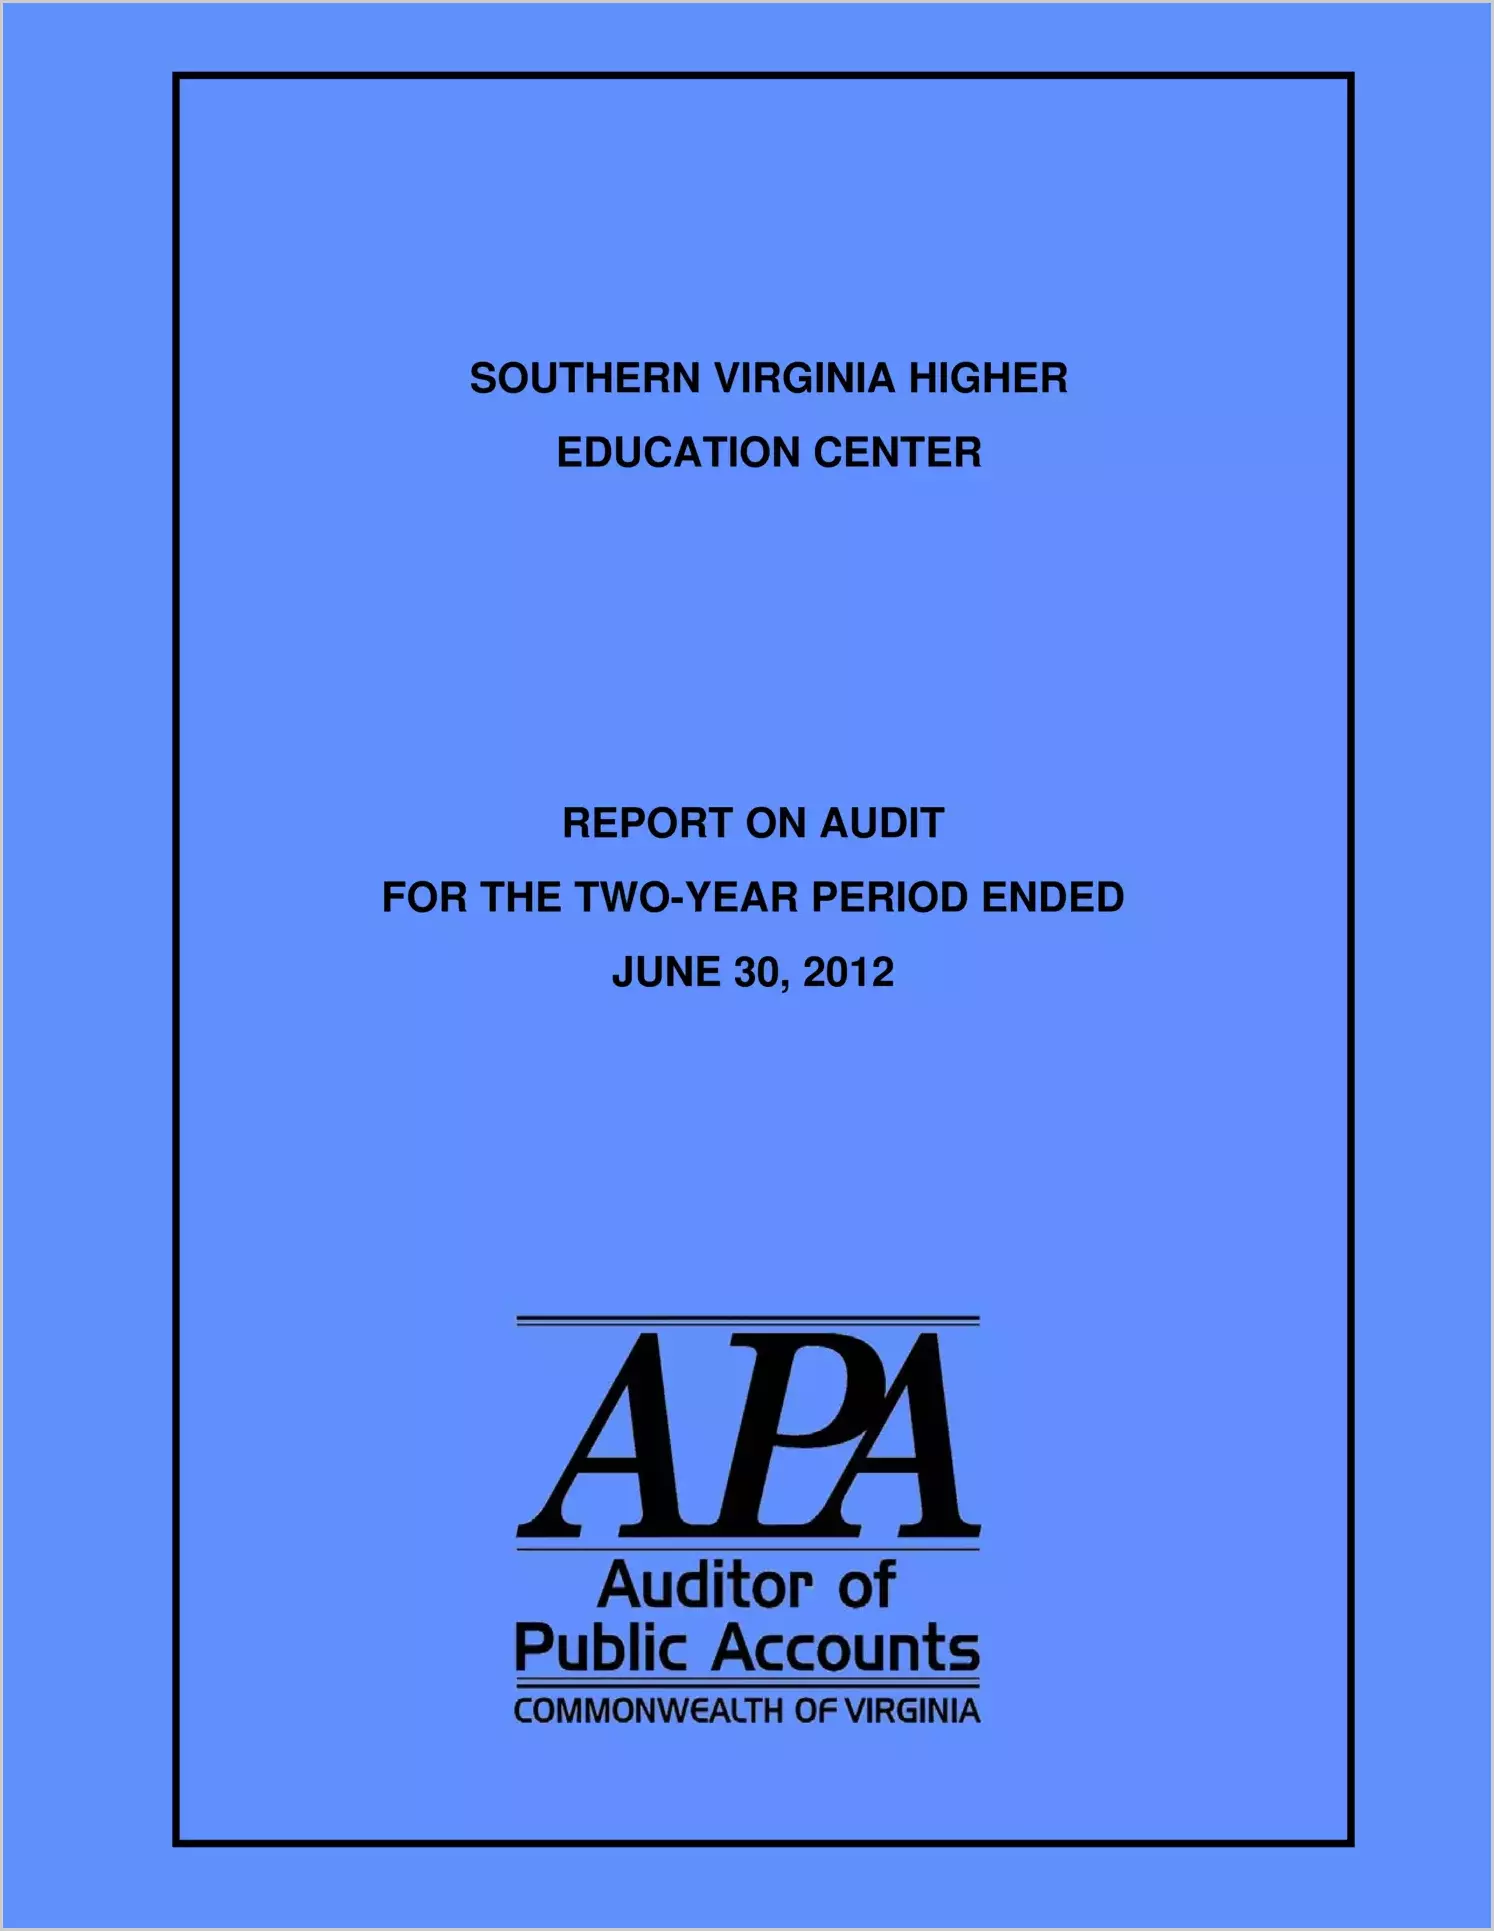 Southern Virginia Higher Education Center for the two-year period ended June 30, 2012